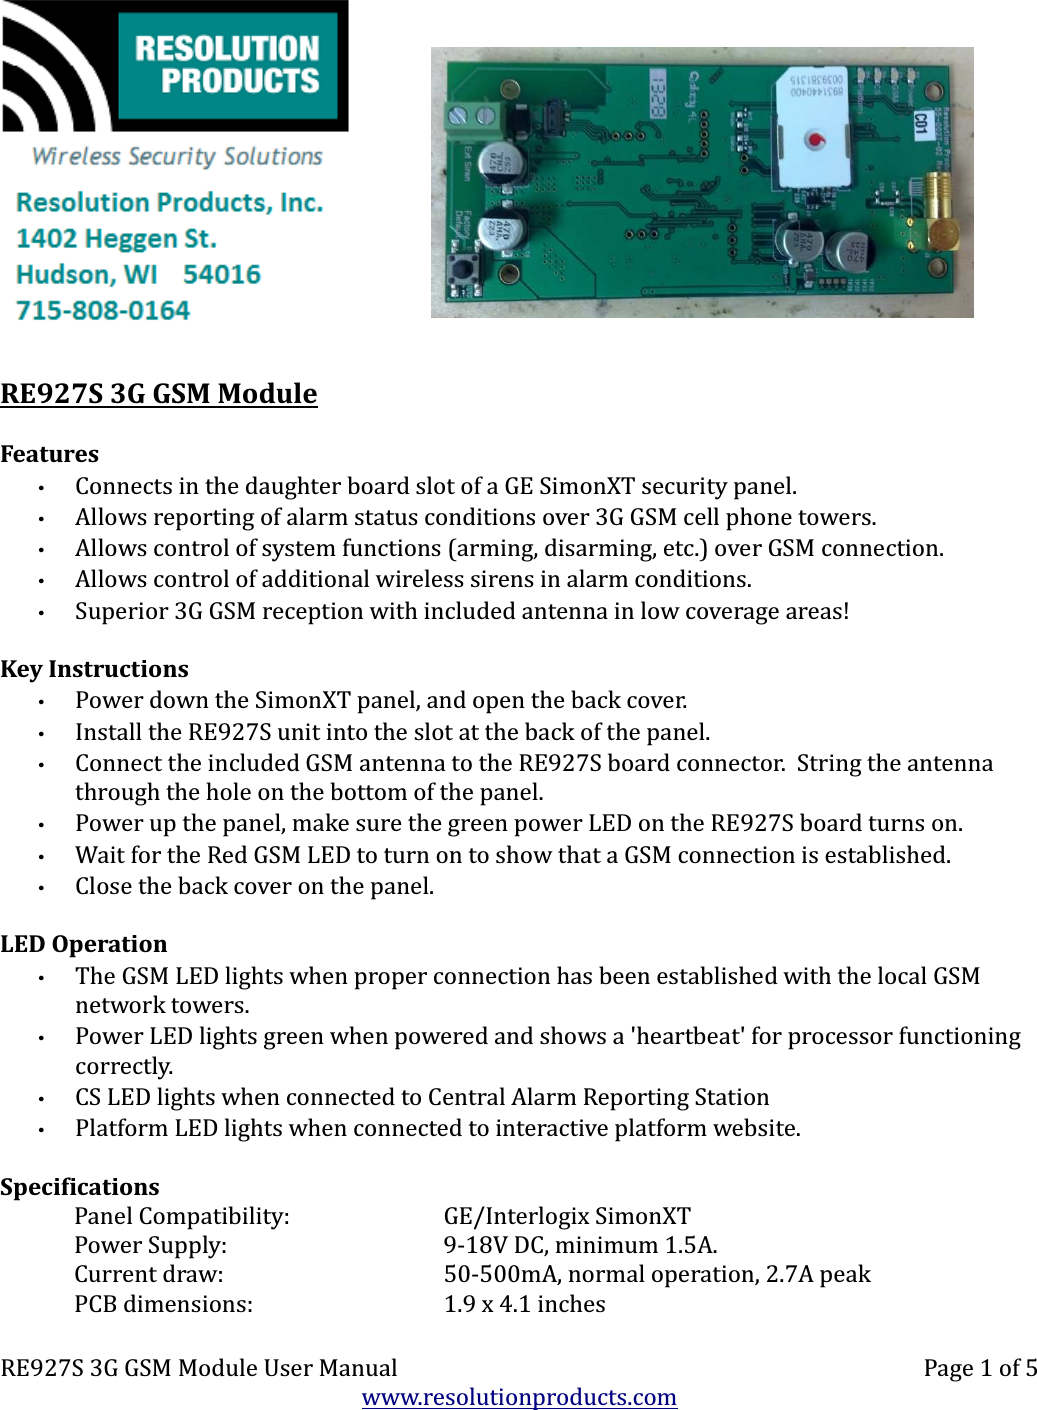    RE927S 3G GSM ModuleFeatures•Connects in the daughter board slot of a GE SimonXT security panel.•Allows reporting of alarm status conditions over 3G GSM cell phone towers.•Allows control of system functions (arming, disarming, etc.) over GSM connection.•Allows control of additional wireless sirens in alarm conditions.•Superior 3G GSM reception with included antenna in low coverage areas!Key Instructions•Power down the SimonXT panel, and open the back cover.•Install the RE927S unit into the slot at the back of the panel.•Connect the included GSM antenna to the RE927S board connector.  String the antenna through the hole on the bottom of the panel.•Power up the panel, make sure the green power LED on the RE927S board turns on.•Wait for the Red GSM LED to turn on to show that a GSM connection is established.•Close the back cover on the panel.LED Operation•The GSM LED lights when proper connection has been established with the local GSM network towers.•Power LED lights green when powered and shows a &apos;heartbeat&apos; for processor functioning correctly.•CS LED lights when connected to Central Alarm Reporting Station•Platform LED lights when connected to interactive platform website.SpecificationsPanel Compatibility: GE/Interlogix SimonXTPower Supply: 9-18V DC, minimum 1.5A.Current draw: 50-500mA, normal operation, 2.7A peakPCB dimensions: 1.9 x 4.1 inchesRE927S 3G GSM Module User Manual Page 1 of 5www.resolutionproducts.com